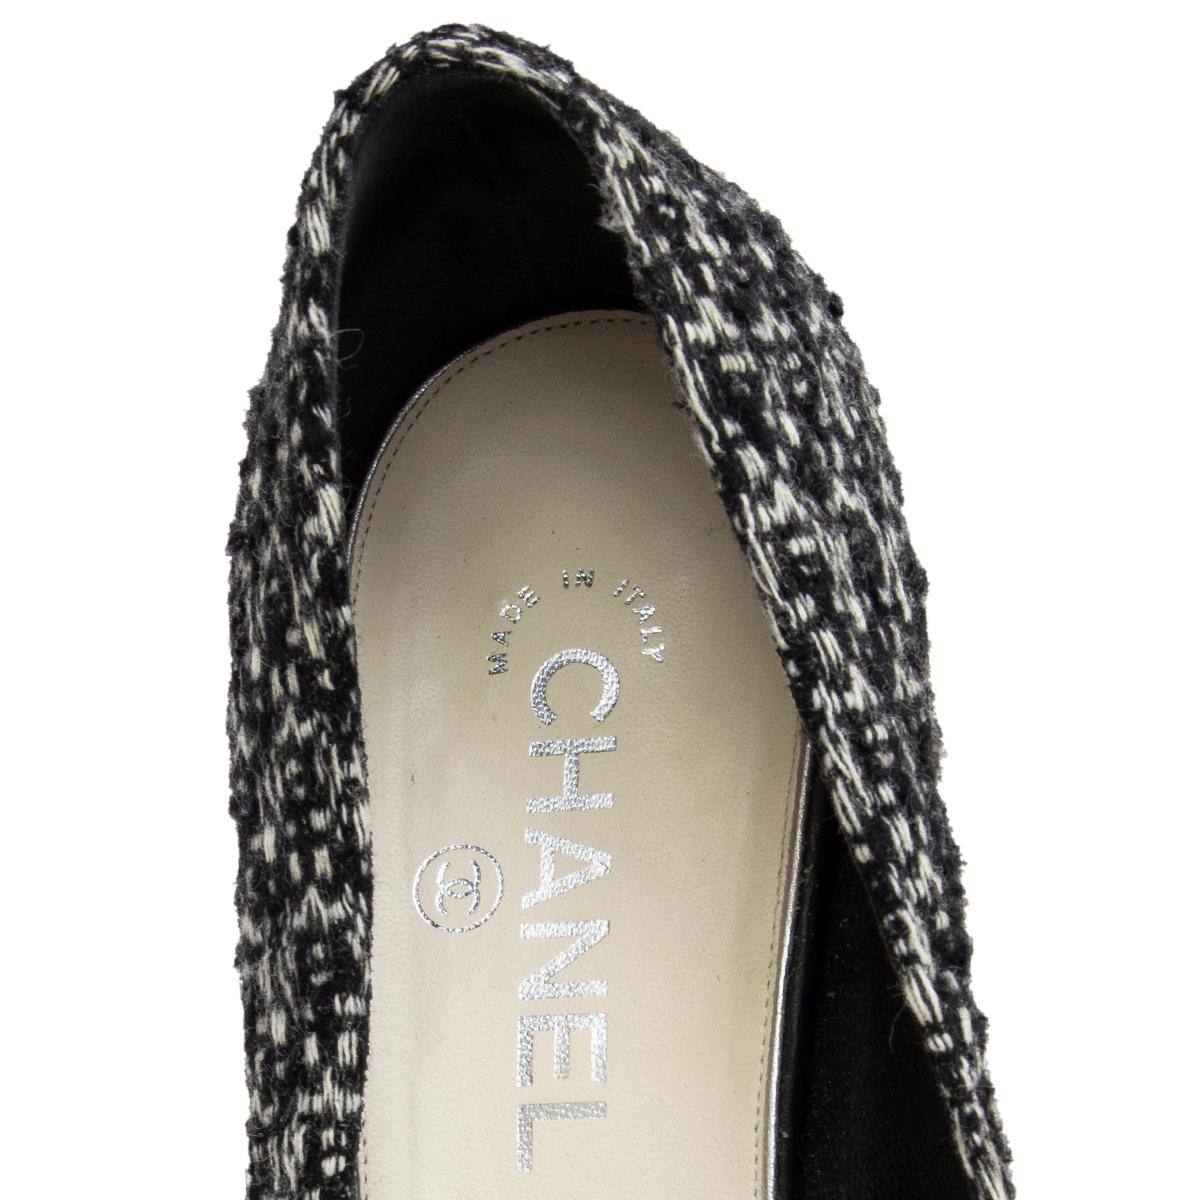 Black CHANEL black & white BOUCLE TWEED BLOCK HEEL Flats Shoes 40 For Sale